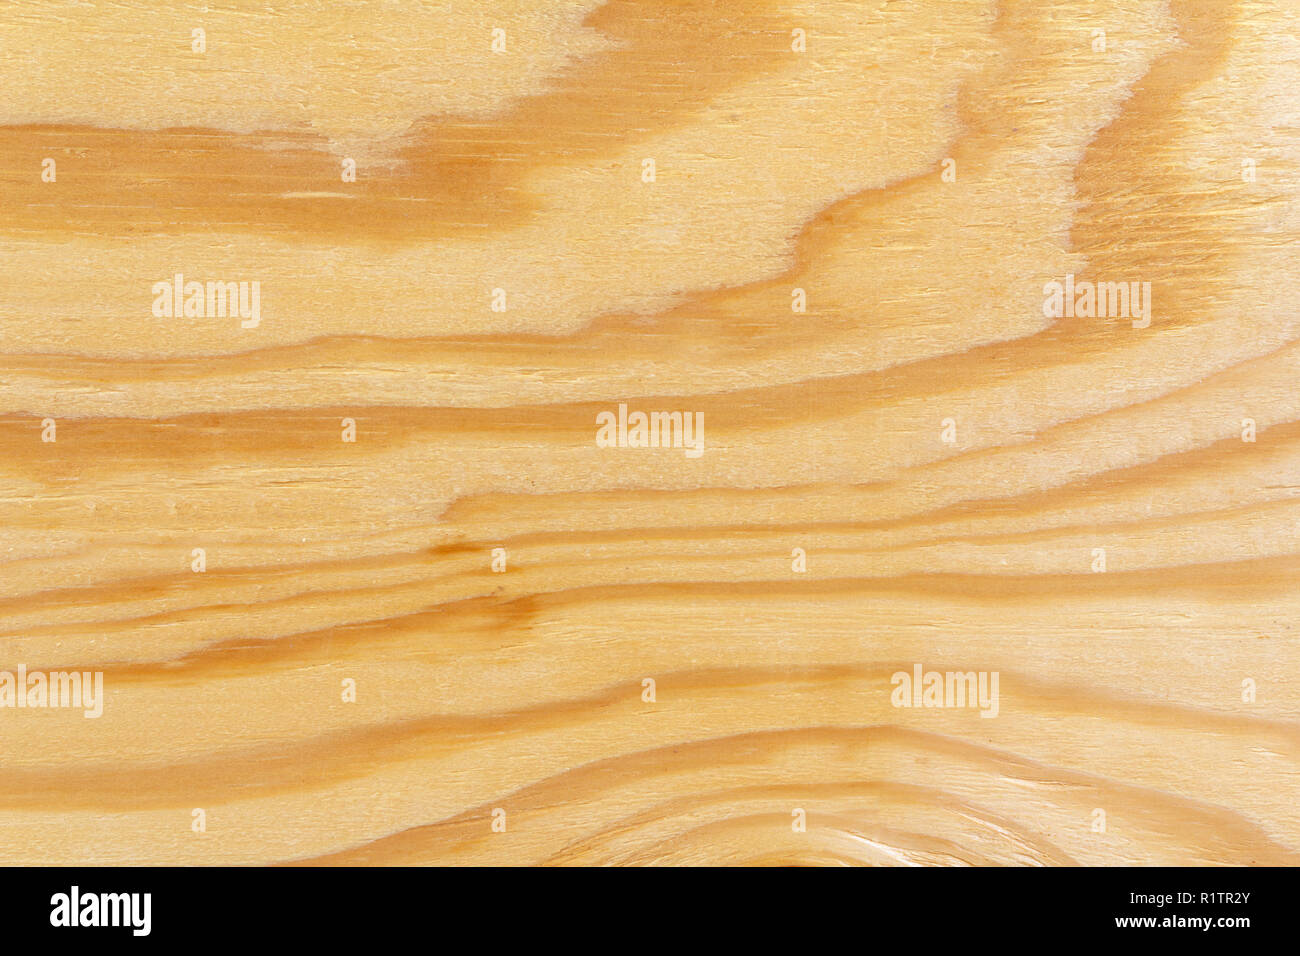 Rough textured plywood grain full frame background Stock Photo